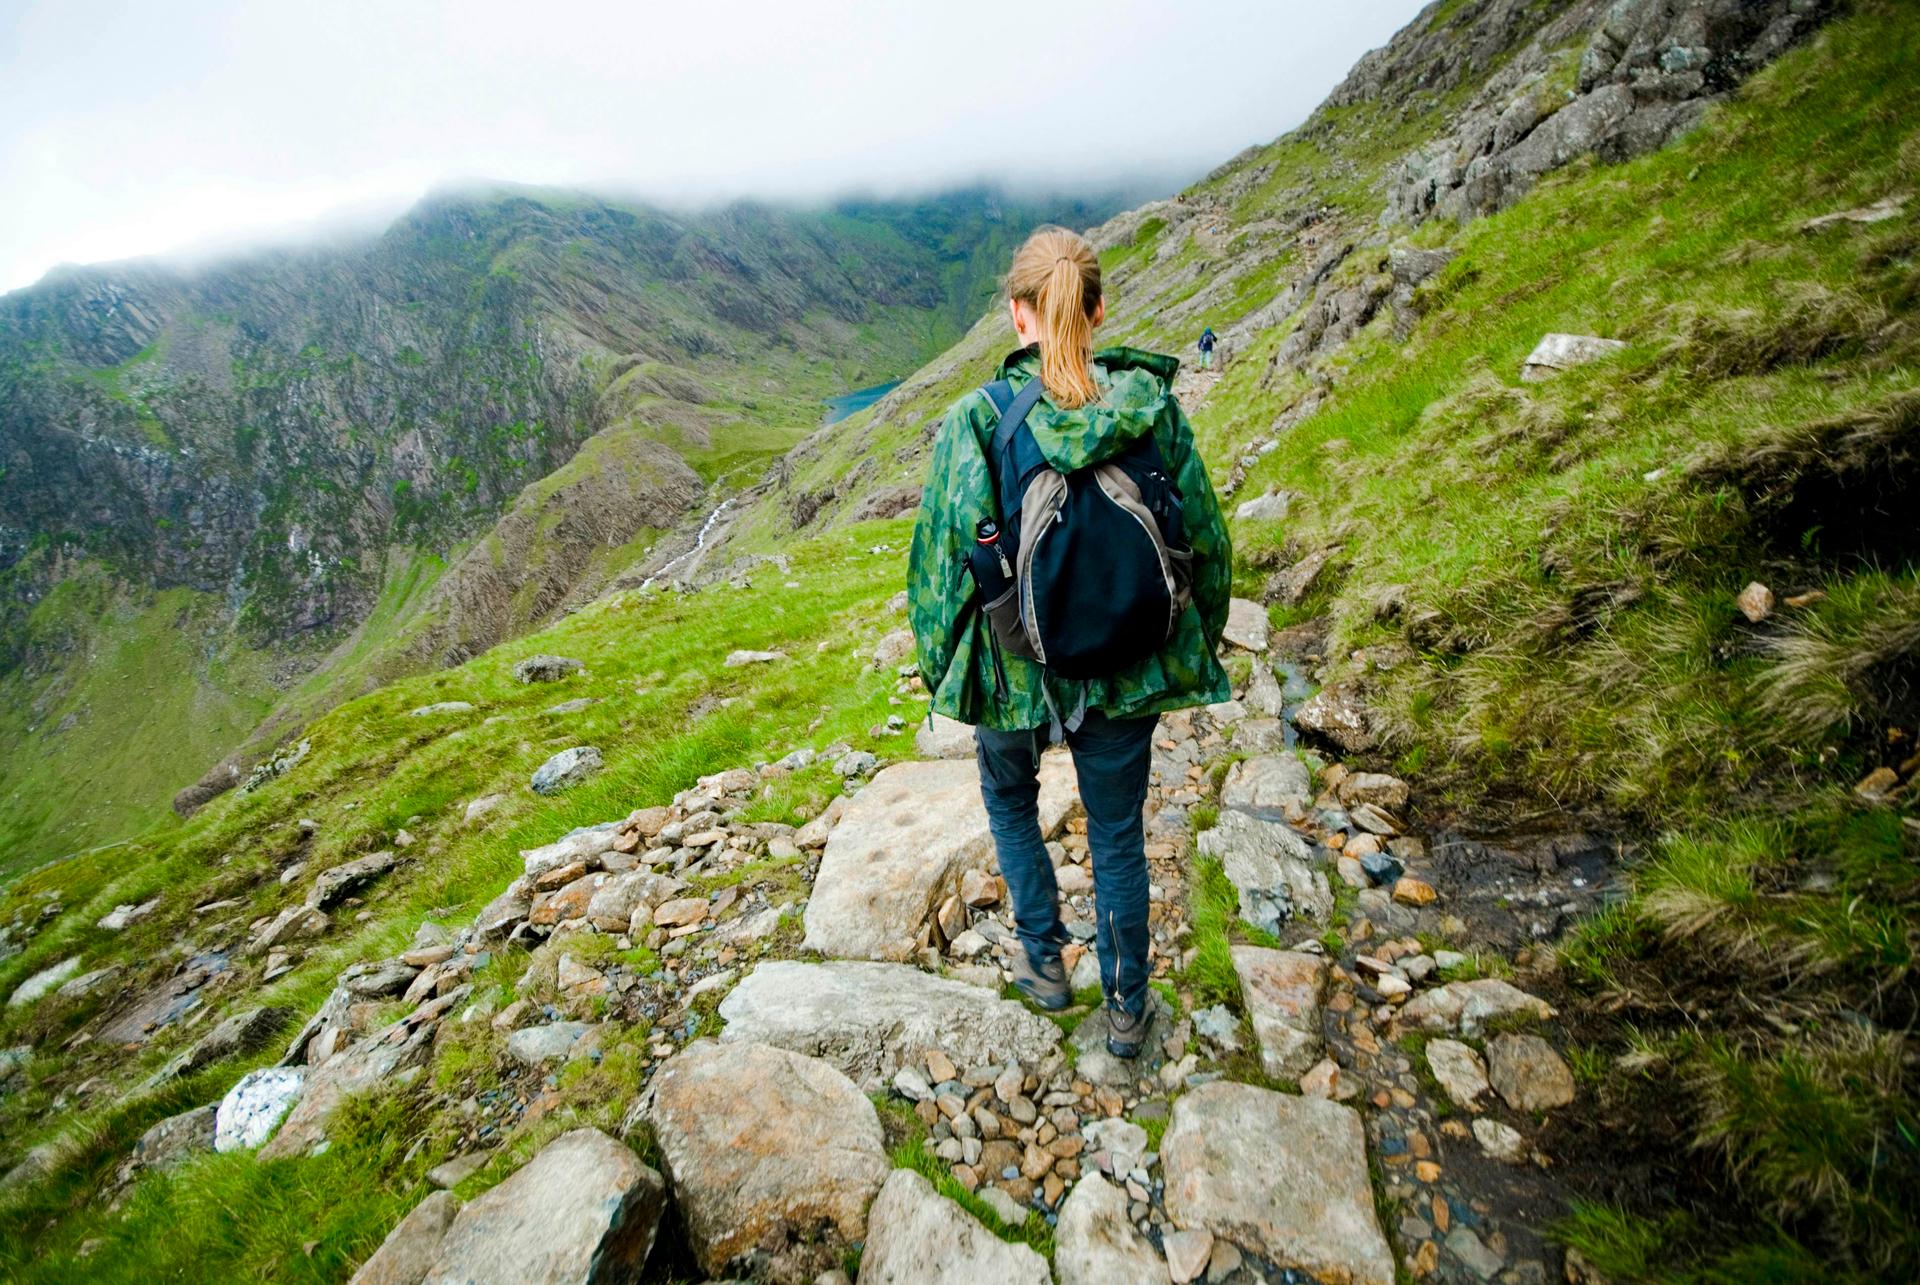 A trekker in a backpack and raincoat walks the Pyg Track on Mount Snowdon in Nant Peris, Wales, United Kingdom